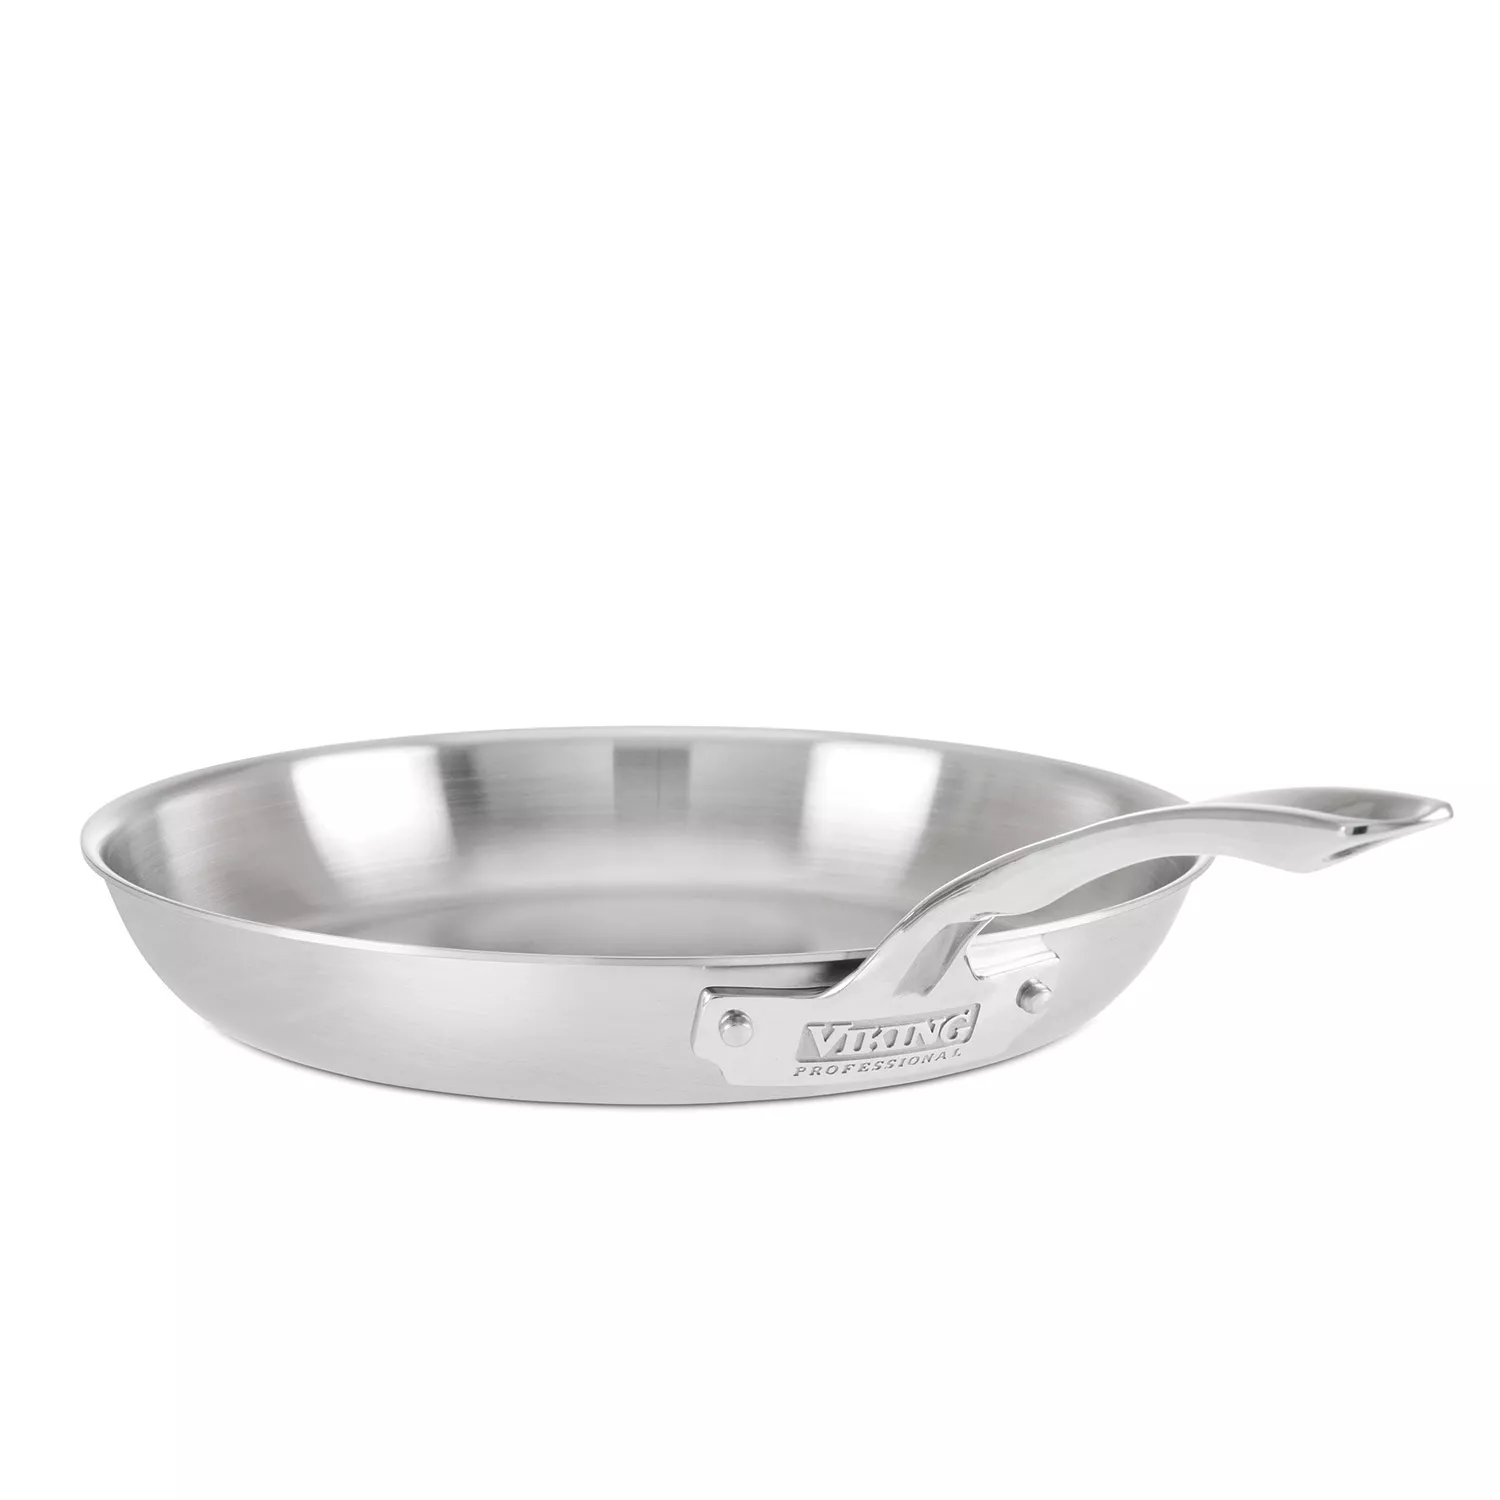 Photos - Pan VIKING Professional 5-Ply Stainless Steel Skillet 4015-1012S 